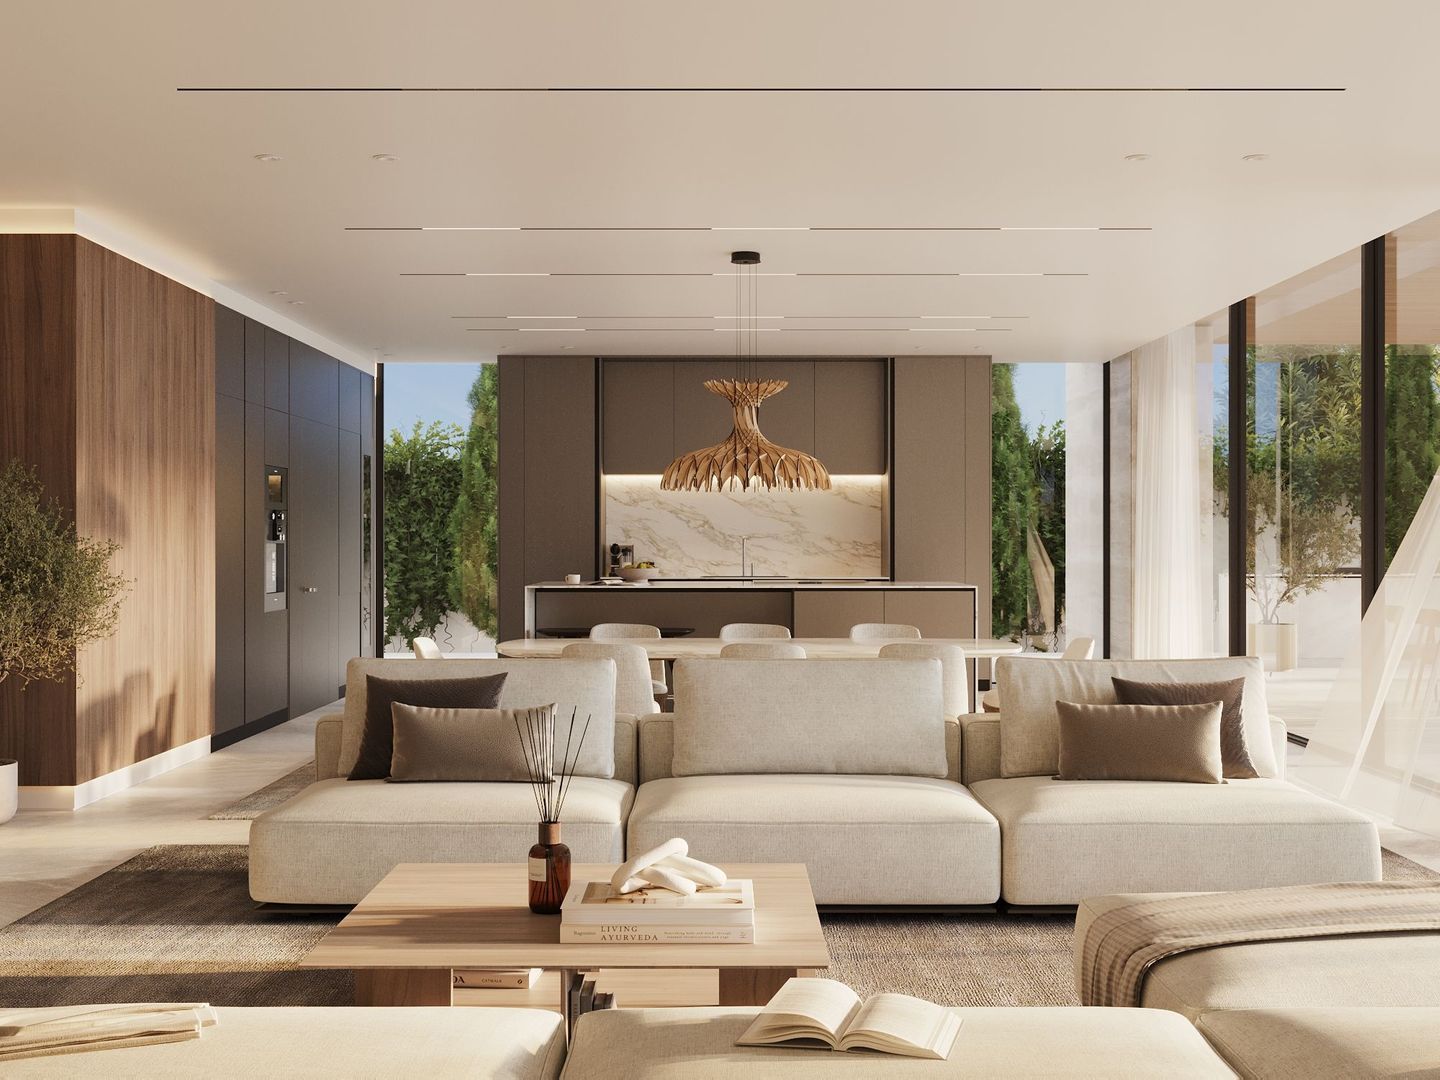 One of the most exciting property launches in Marbella, Benahavis foto-5